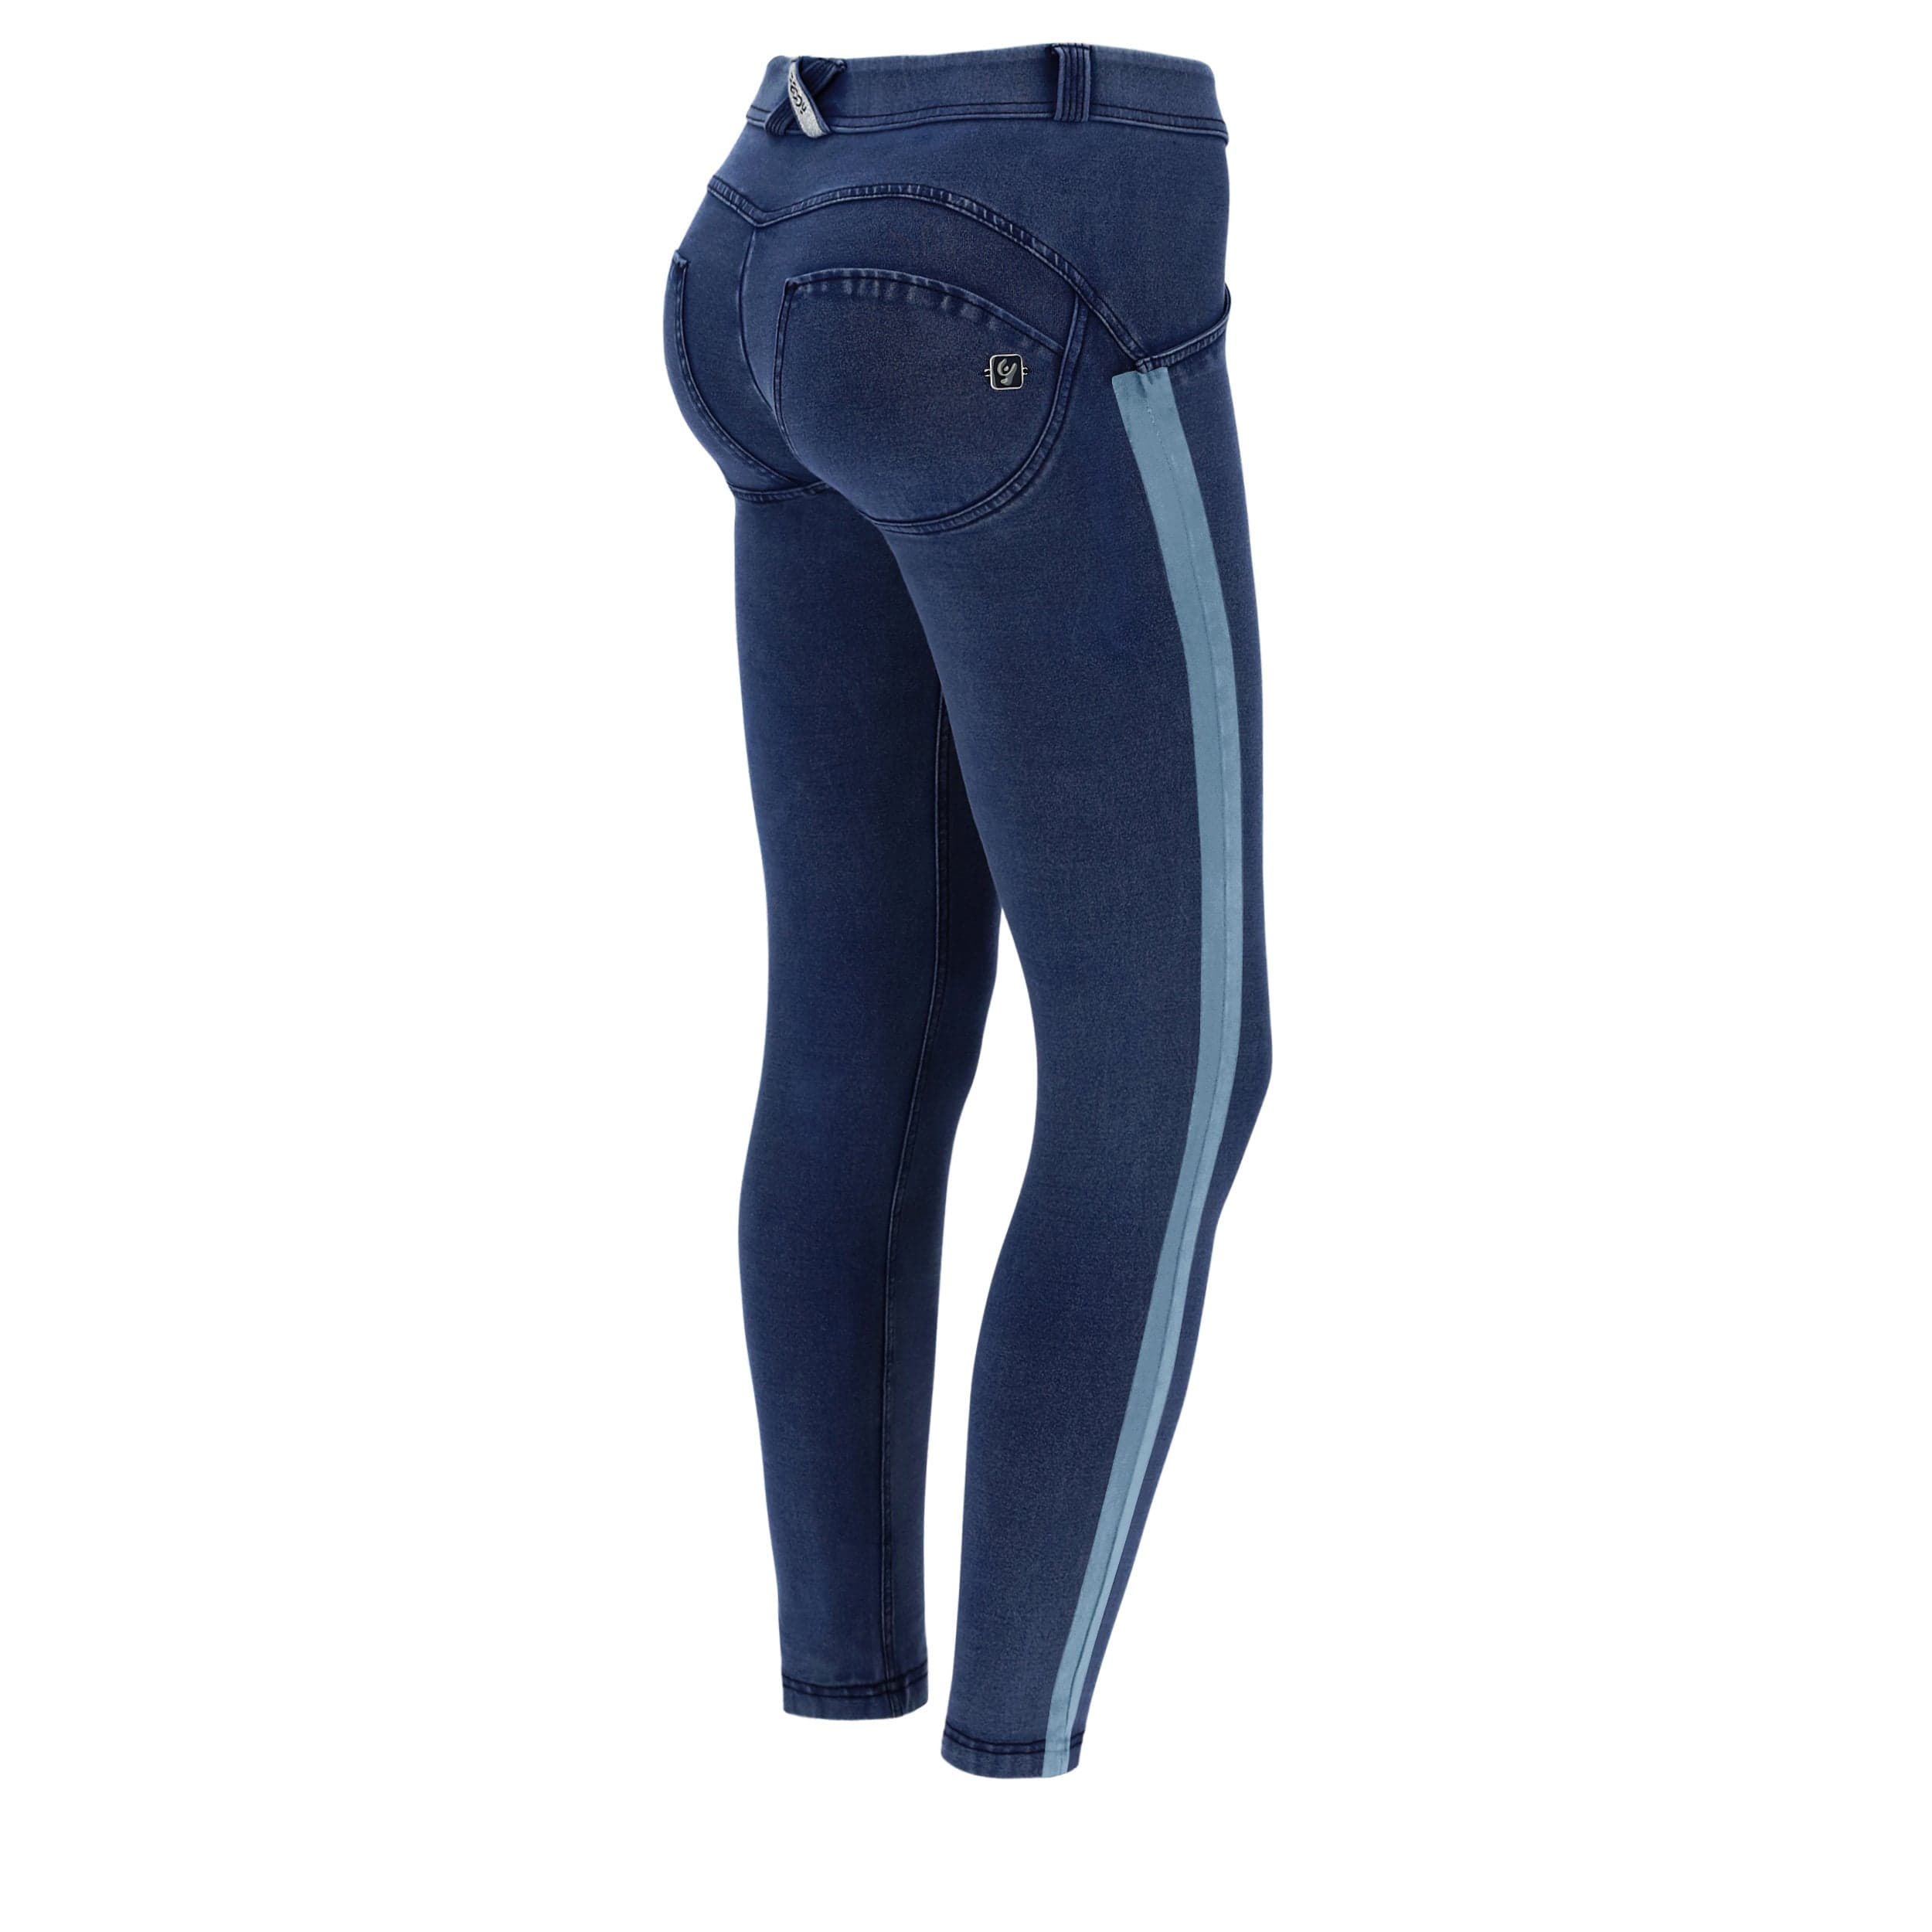 WR.UP® Denim with Lateral Band - Mid Rise - 7/8 Length - Dark Blue + Blue Stitching 1